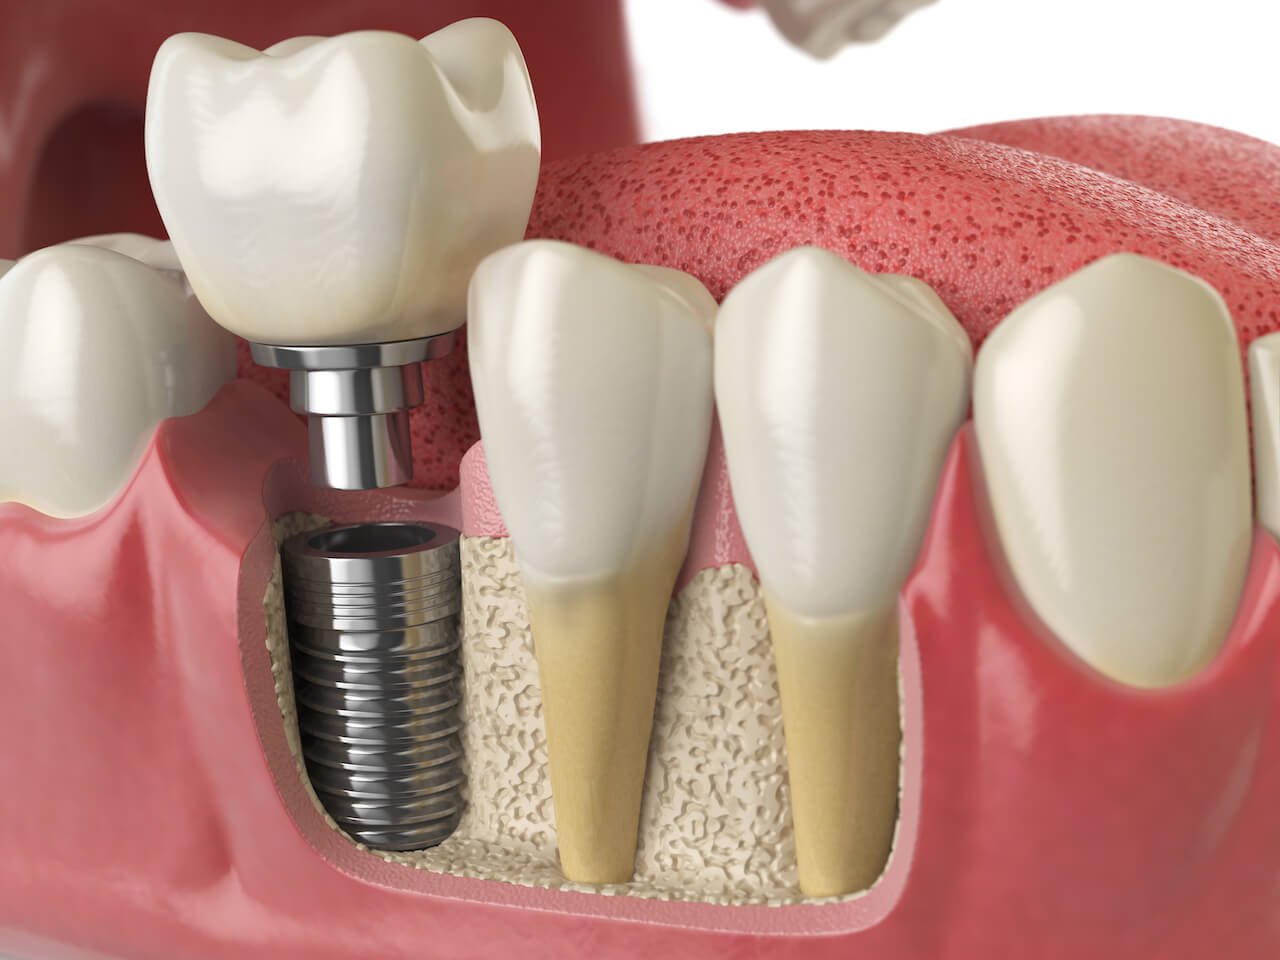 Dental implant, a small titanium post inserted into the jawbone to replace the root of a missing tooth, with an abutment and crown attached on top.